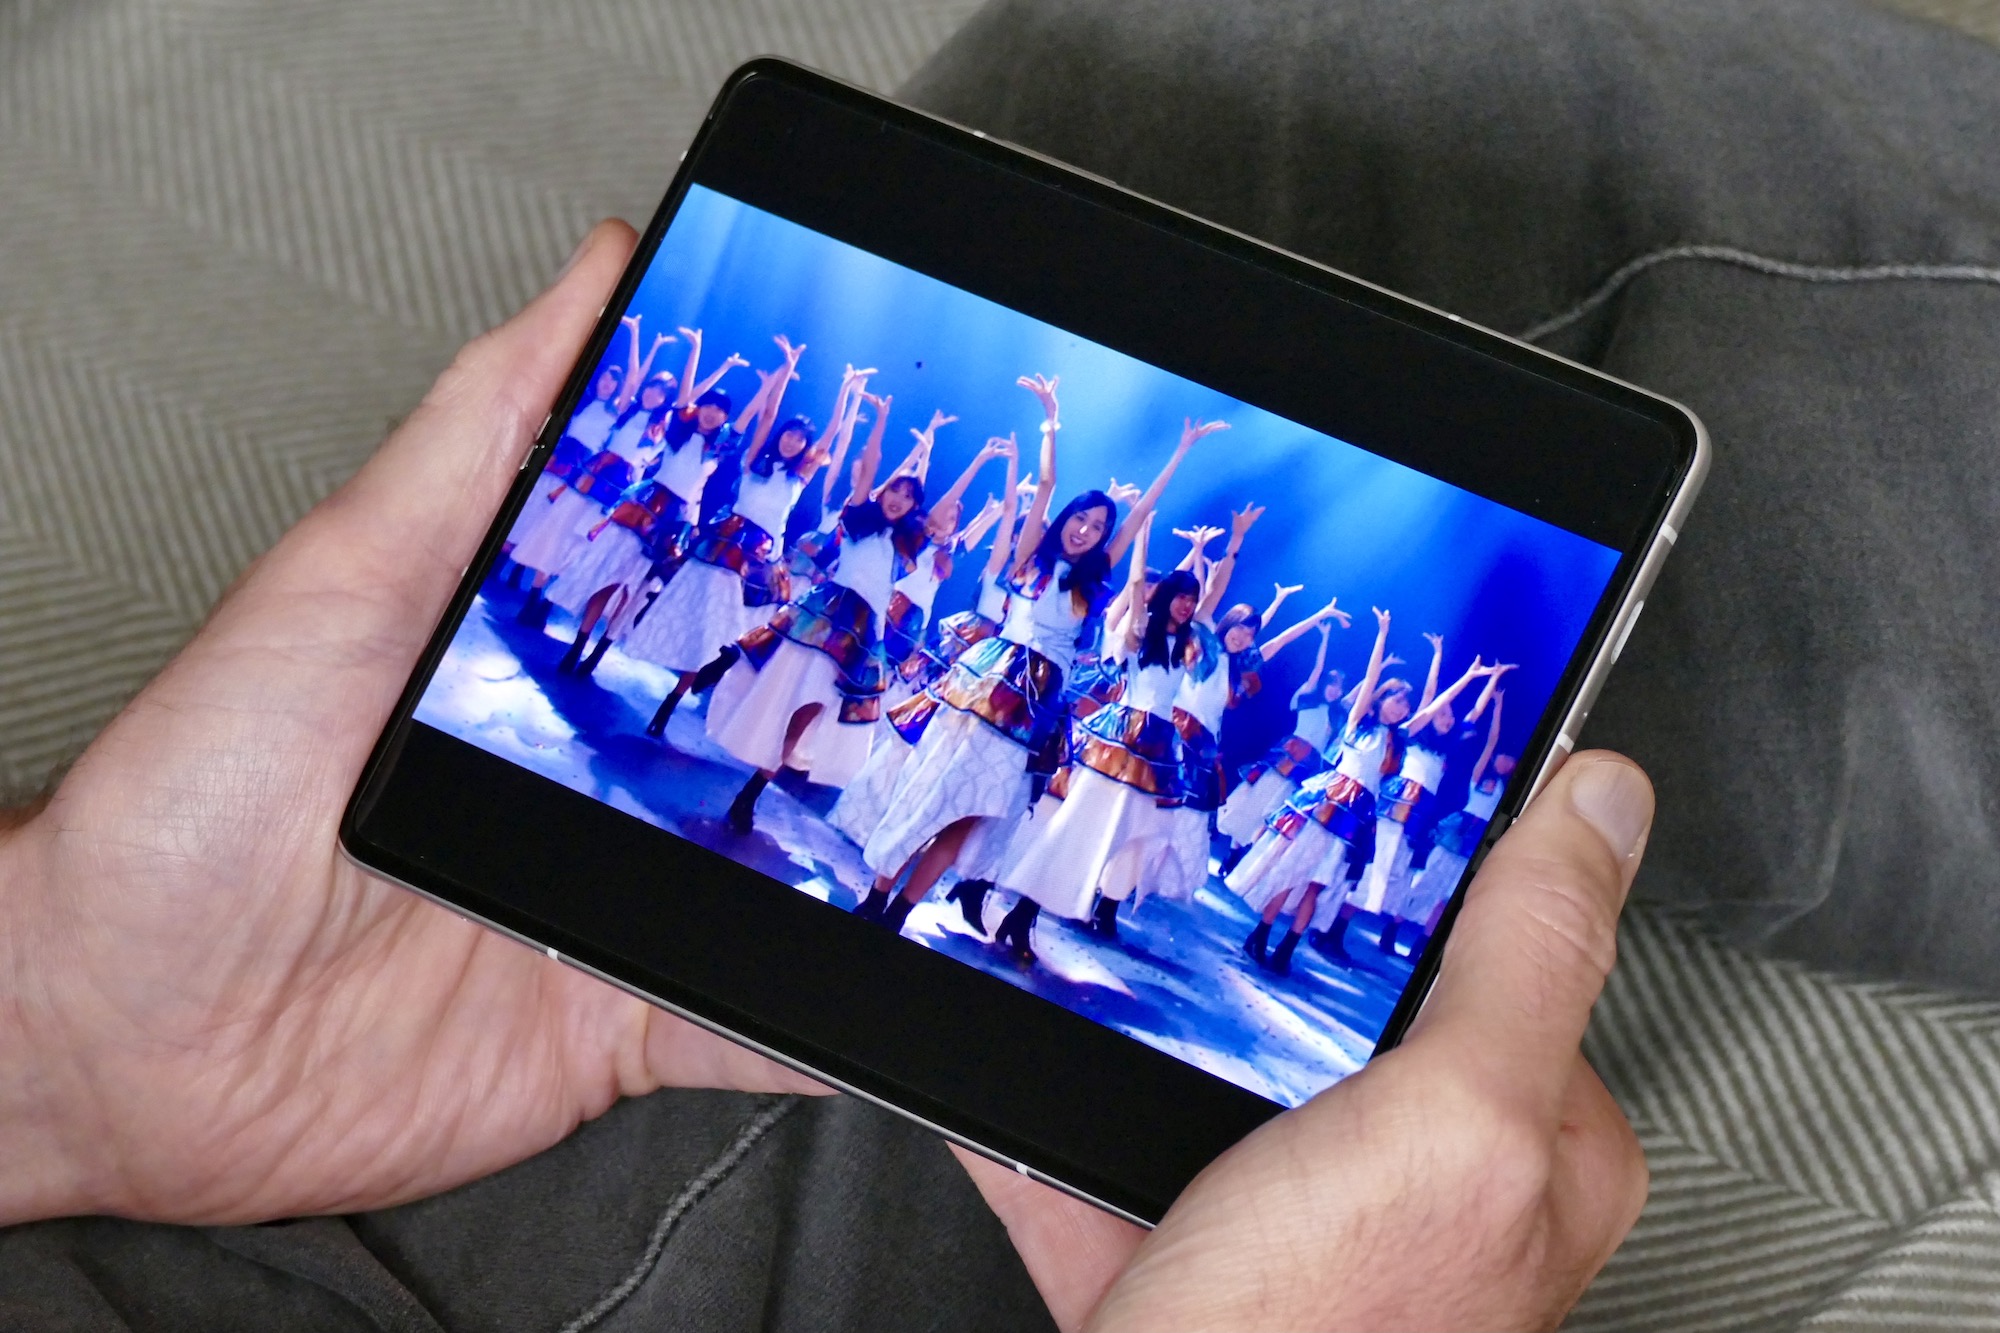 Video playing on the open Galaxy Z Fold 3.